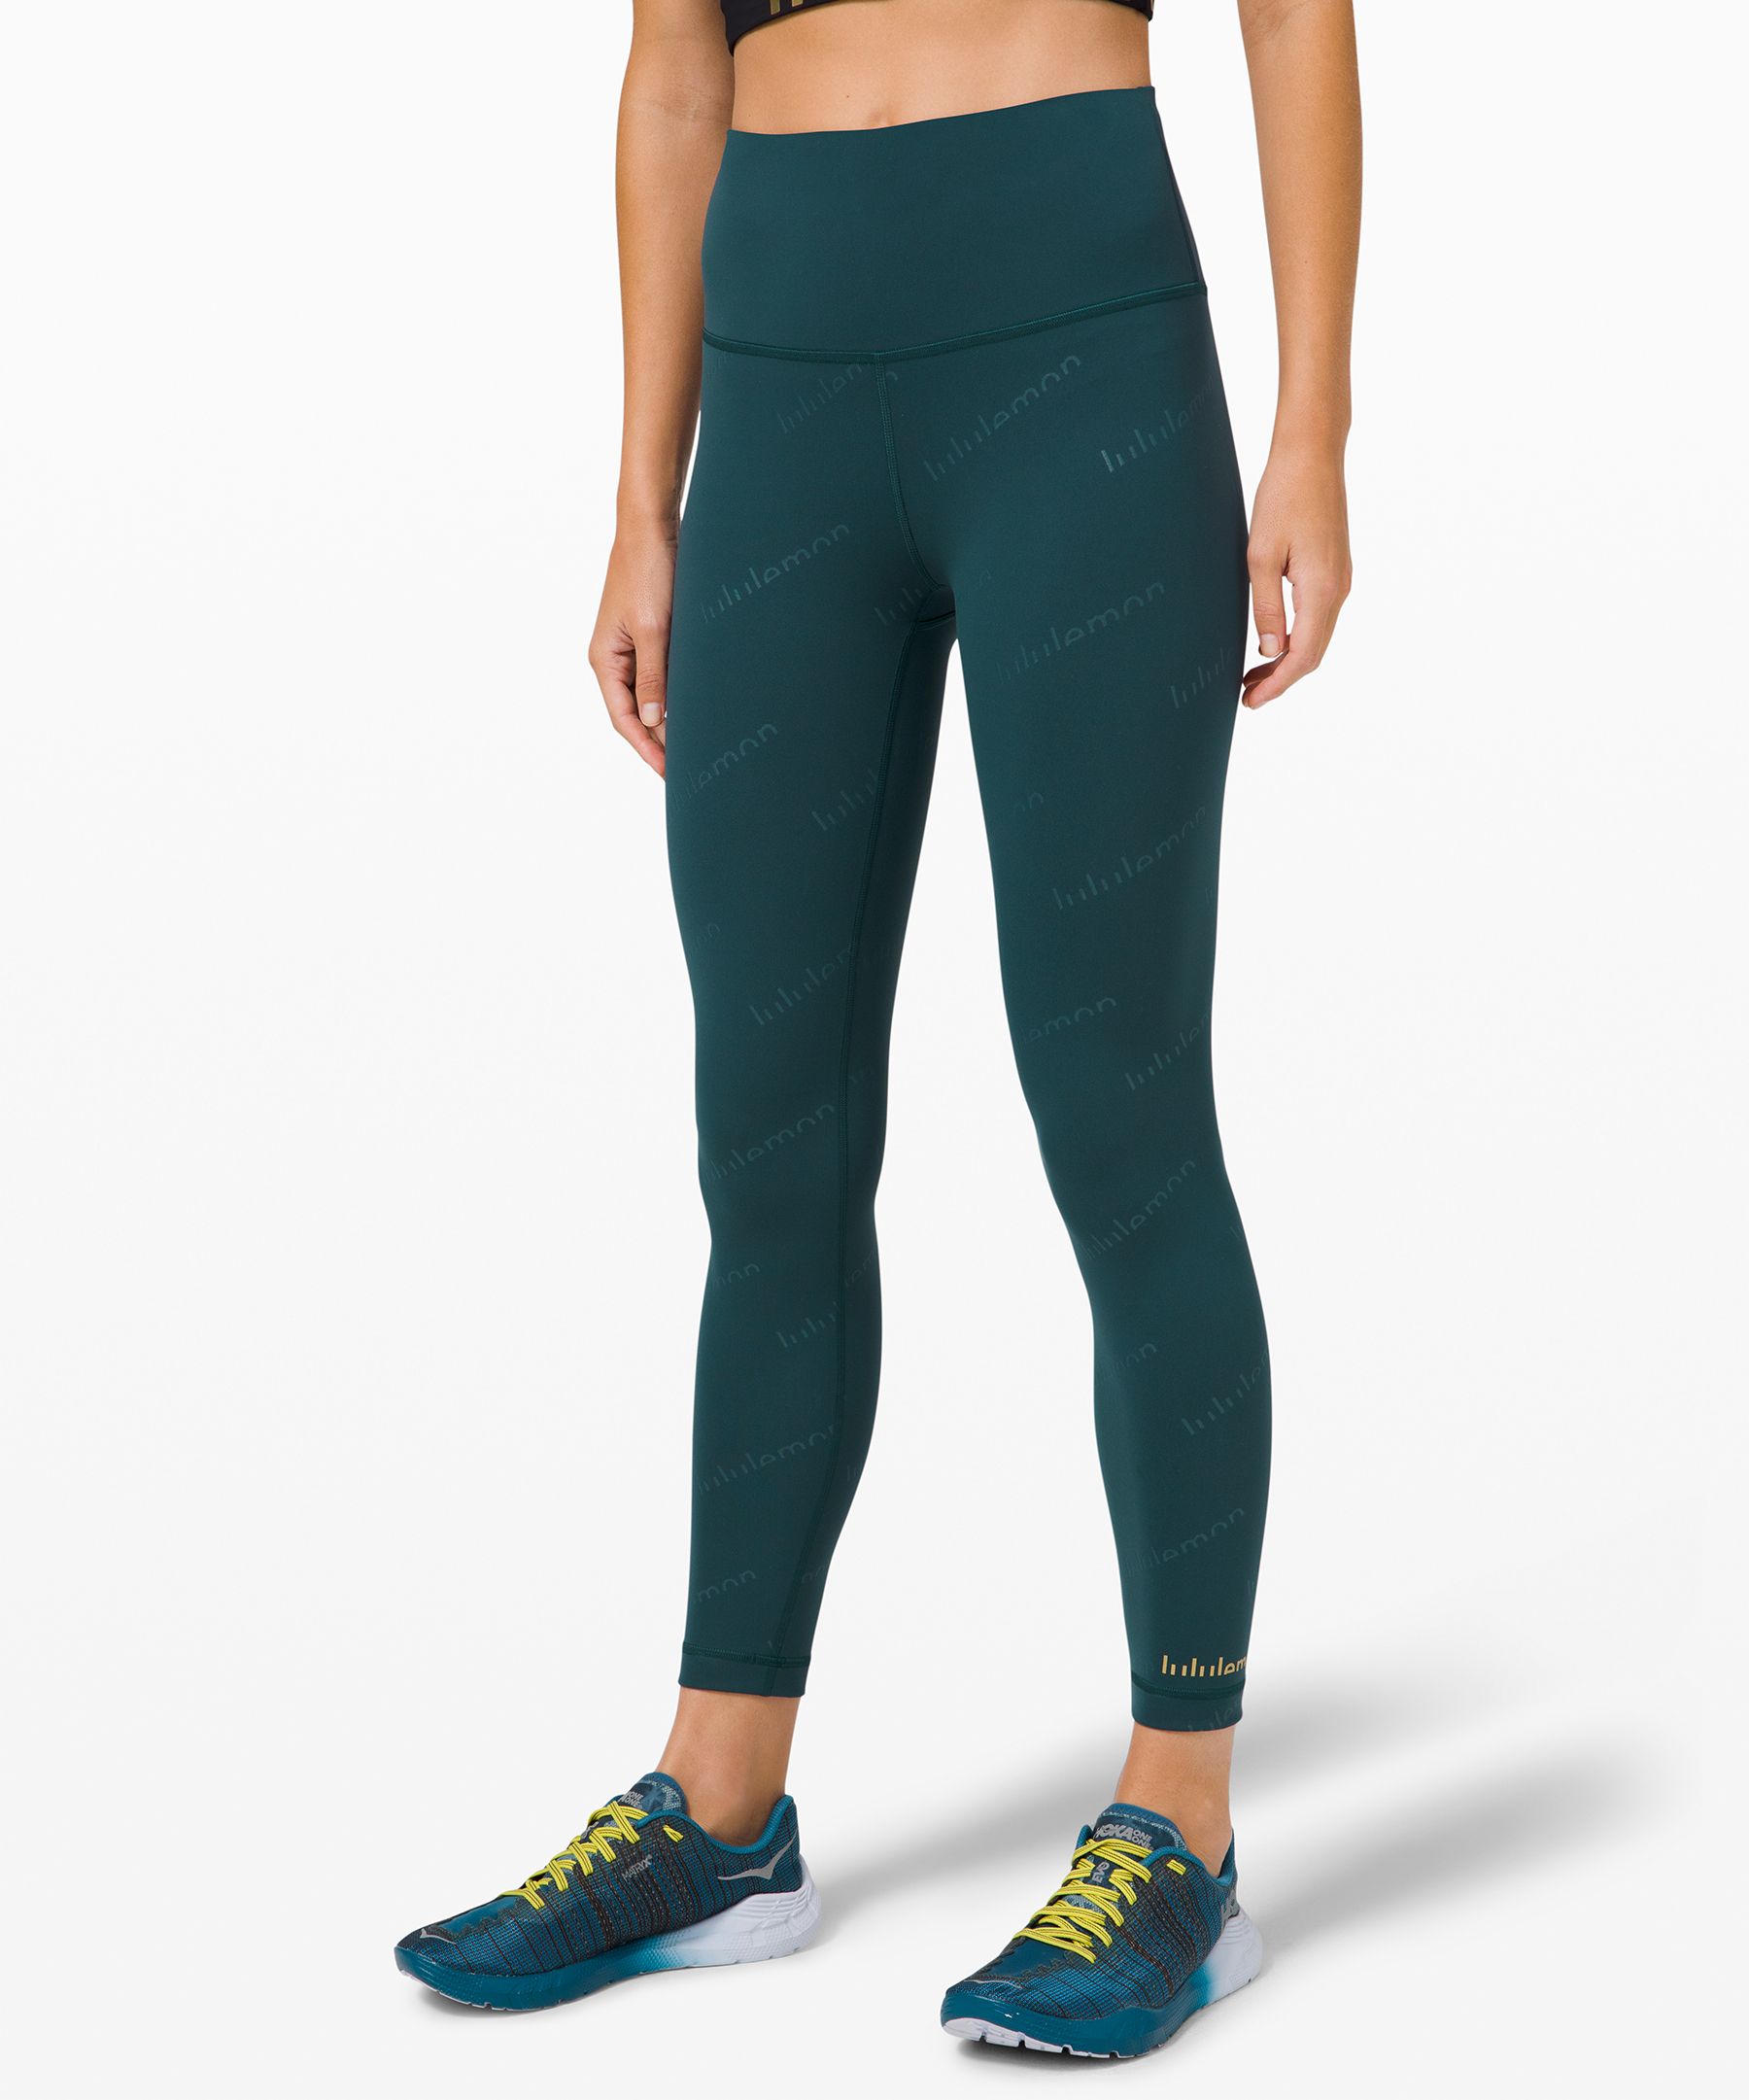 Wunder Train High-Rise Tight 25, Women's Fashion, Activewear on